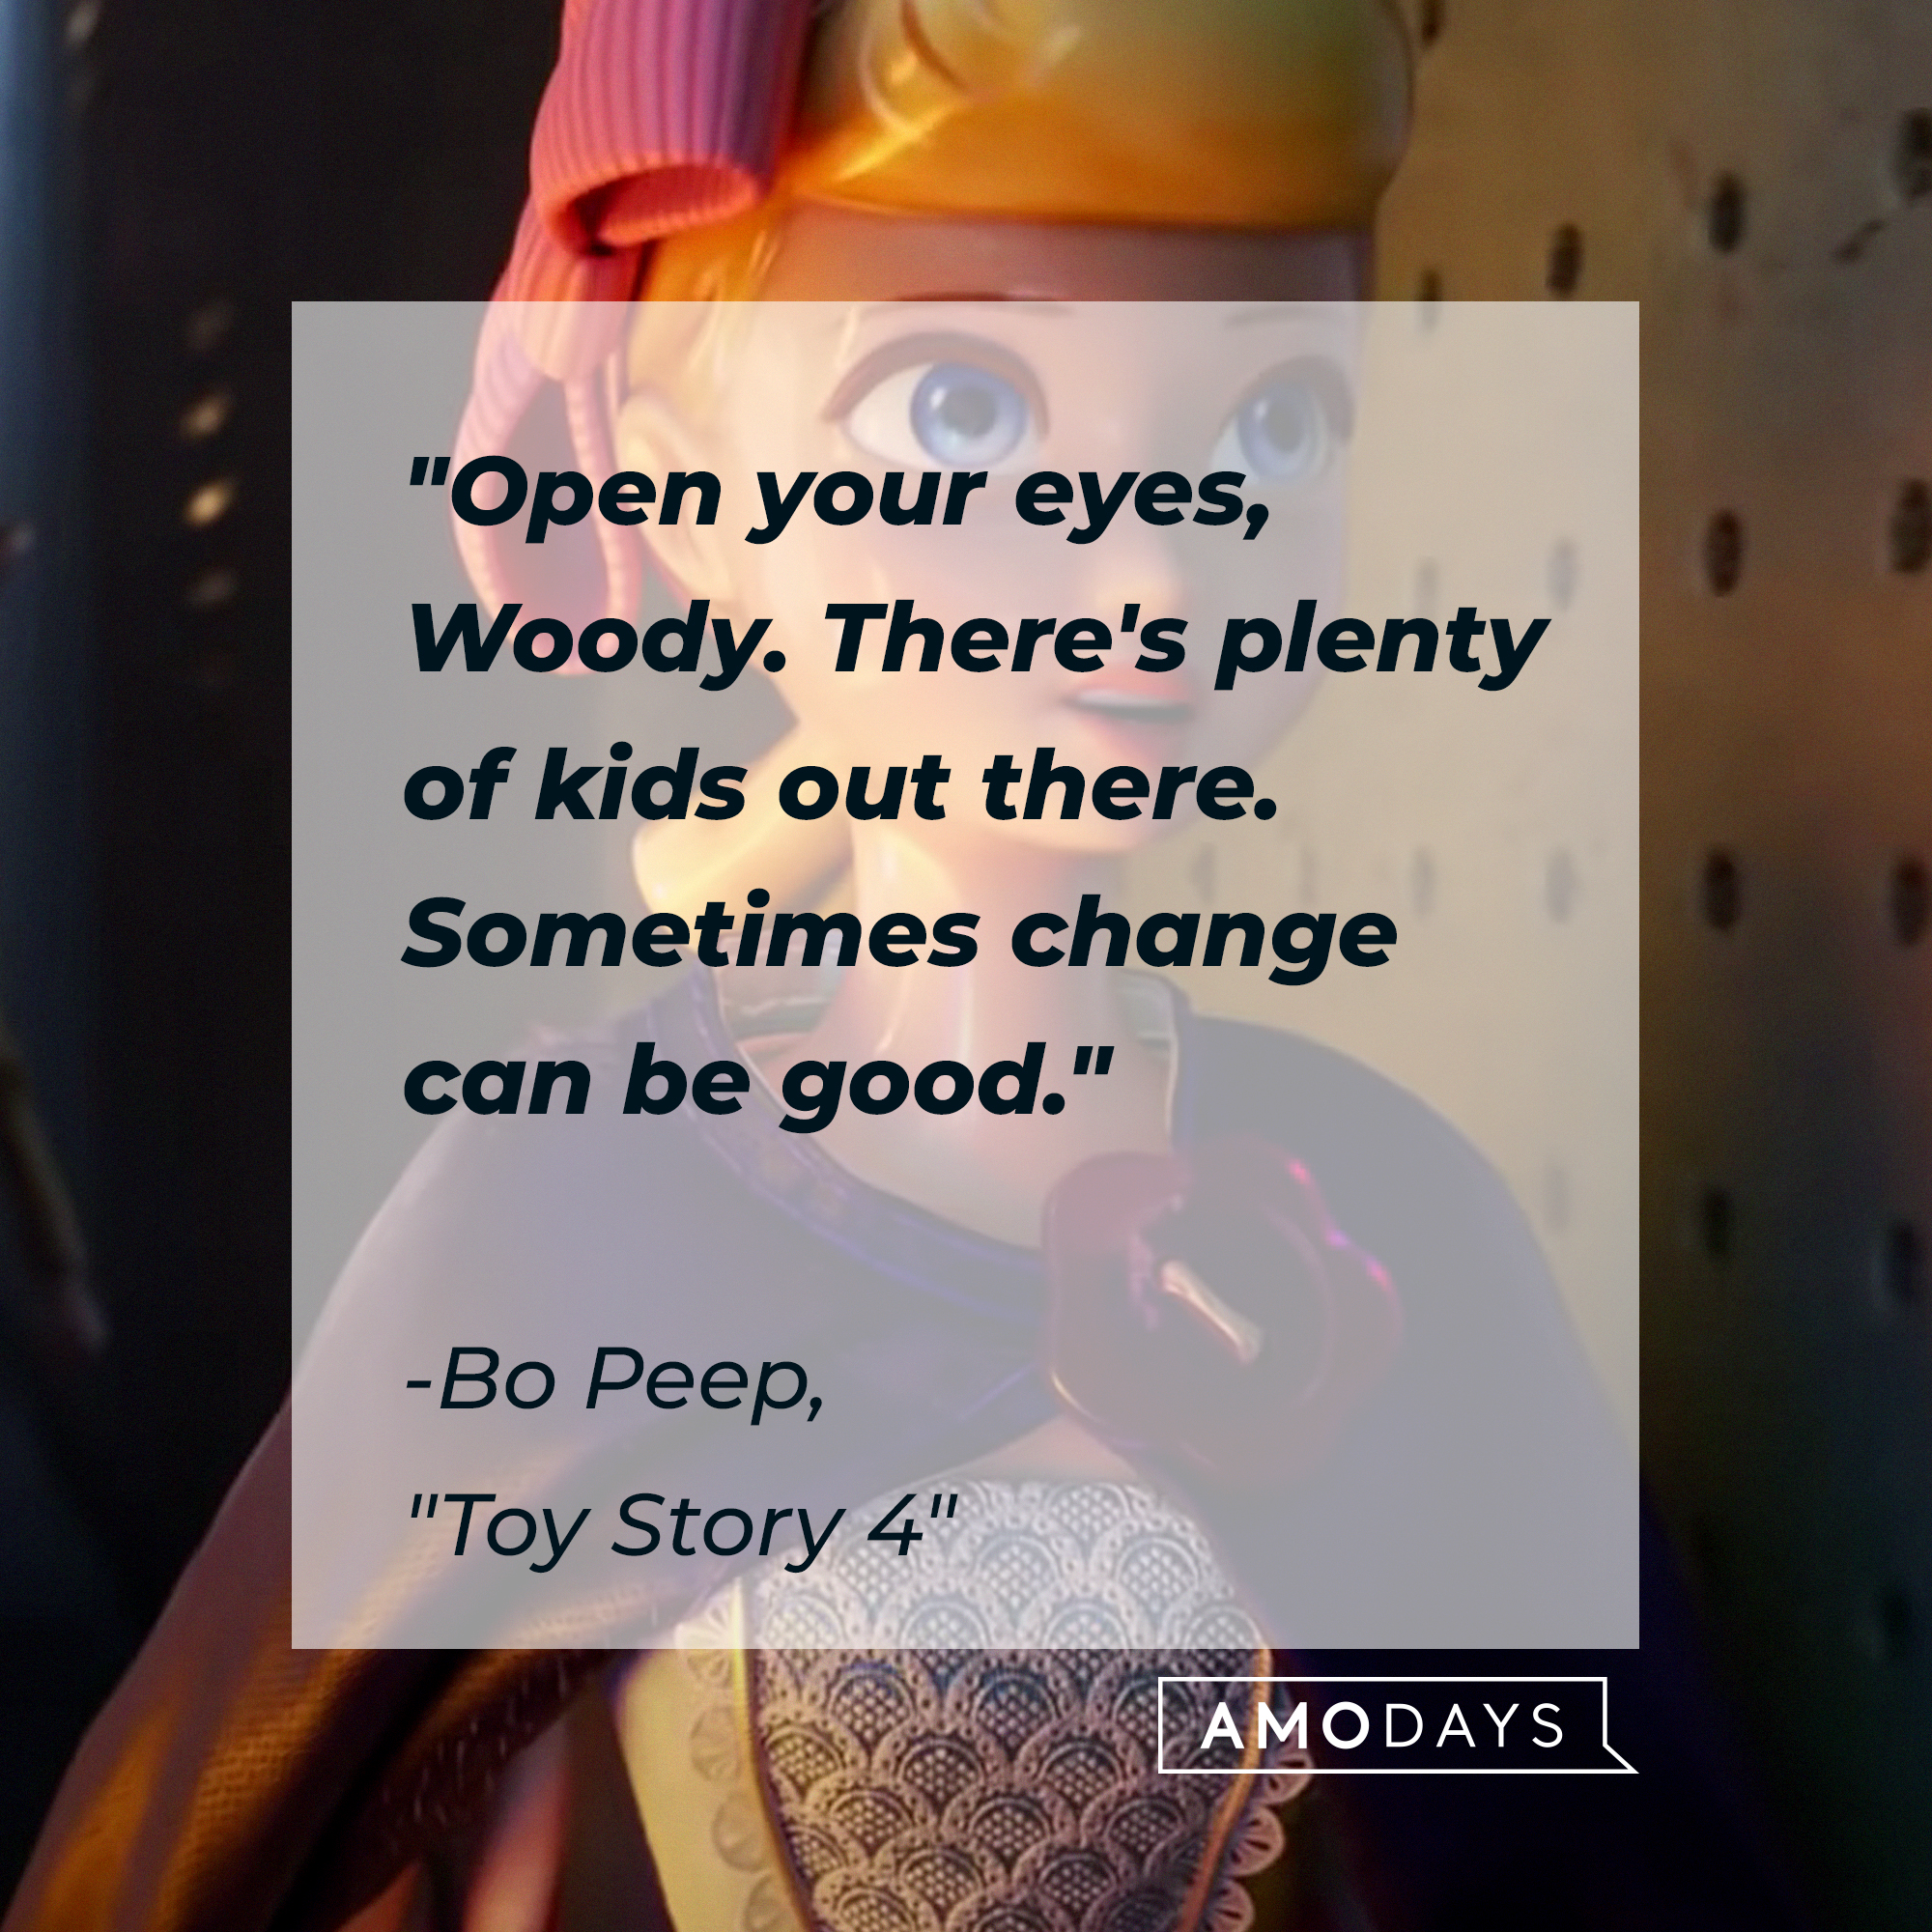 Bo Peep's quote: "Open your eyes, Woody. There's plenty of kids out there. Sometimes change can be good." | Source: Youtube.com/Pixar